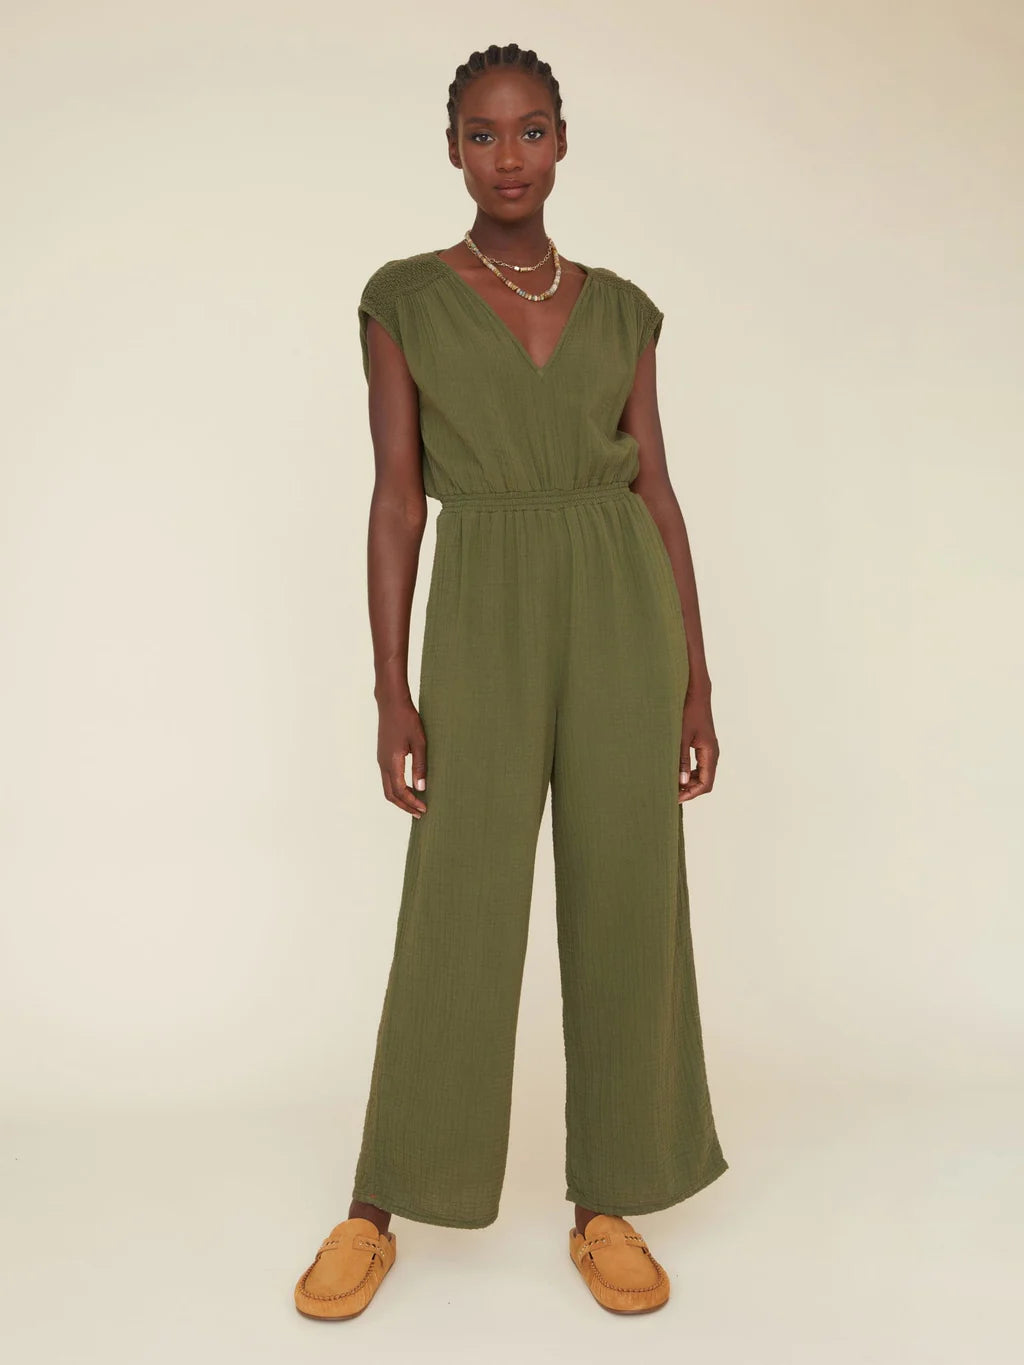 XIRENA Nell Jumpsuit in Sage